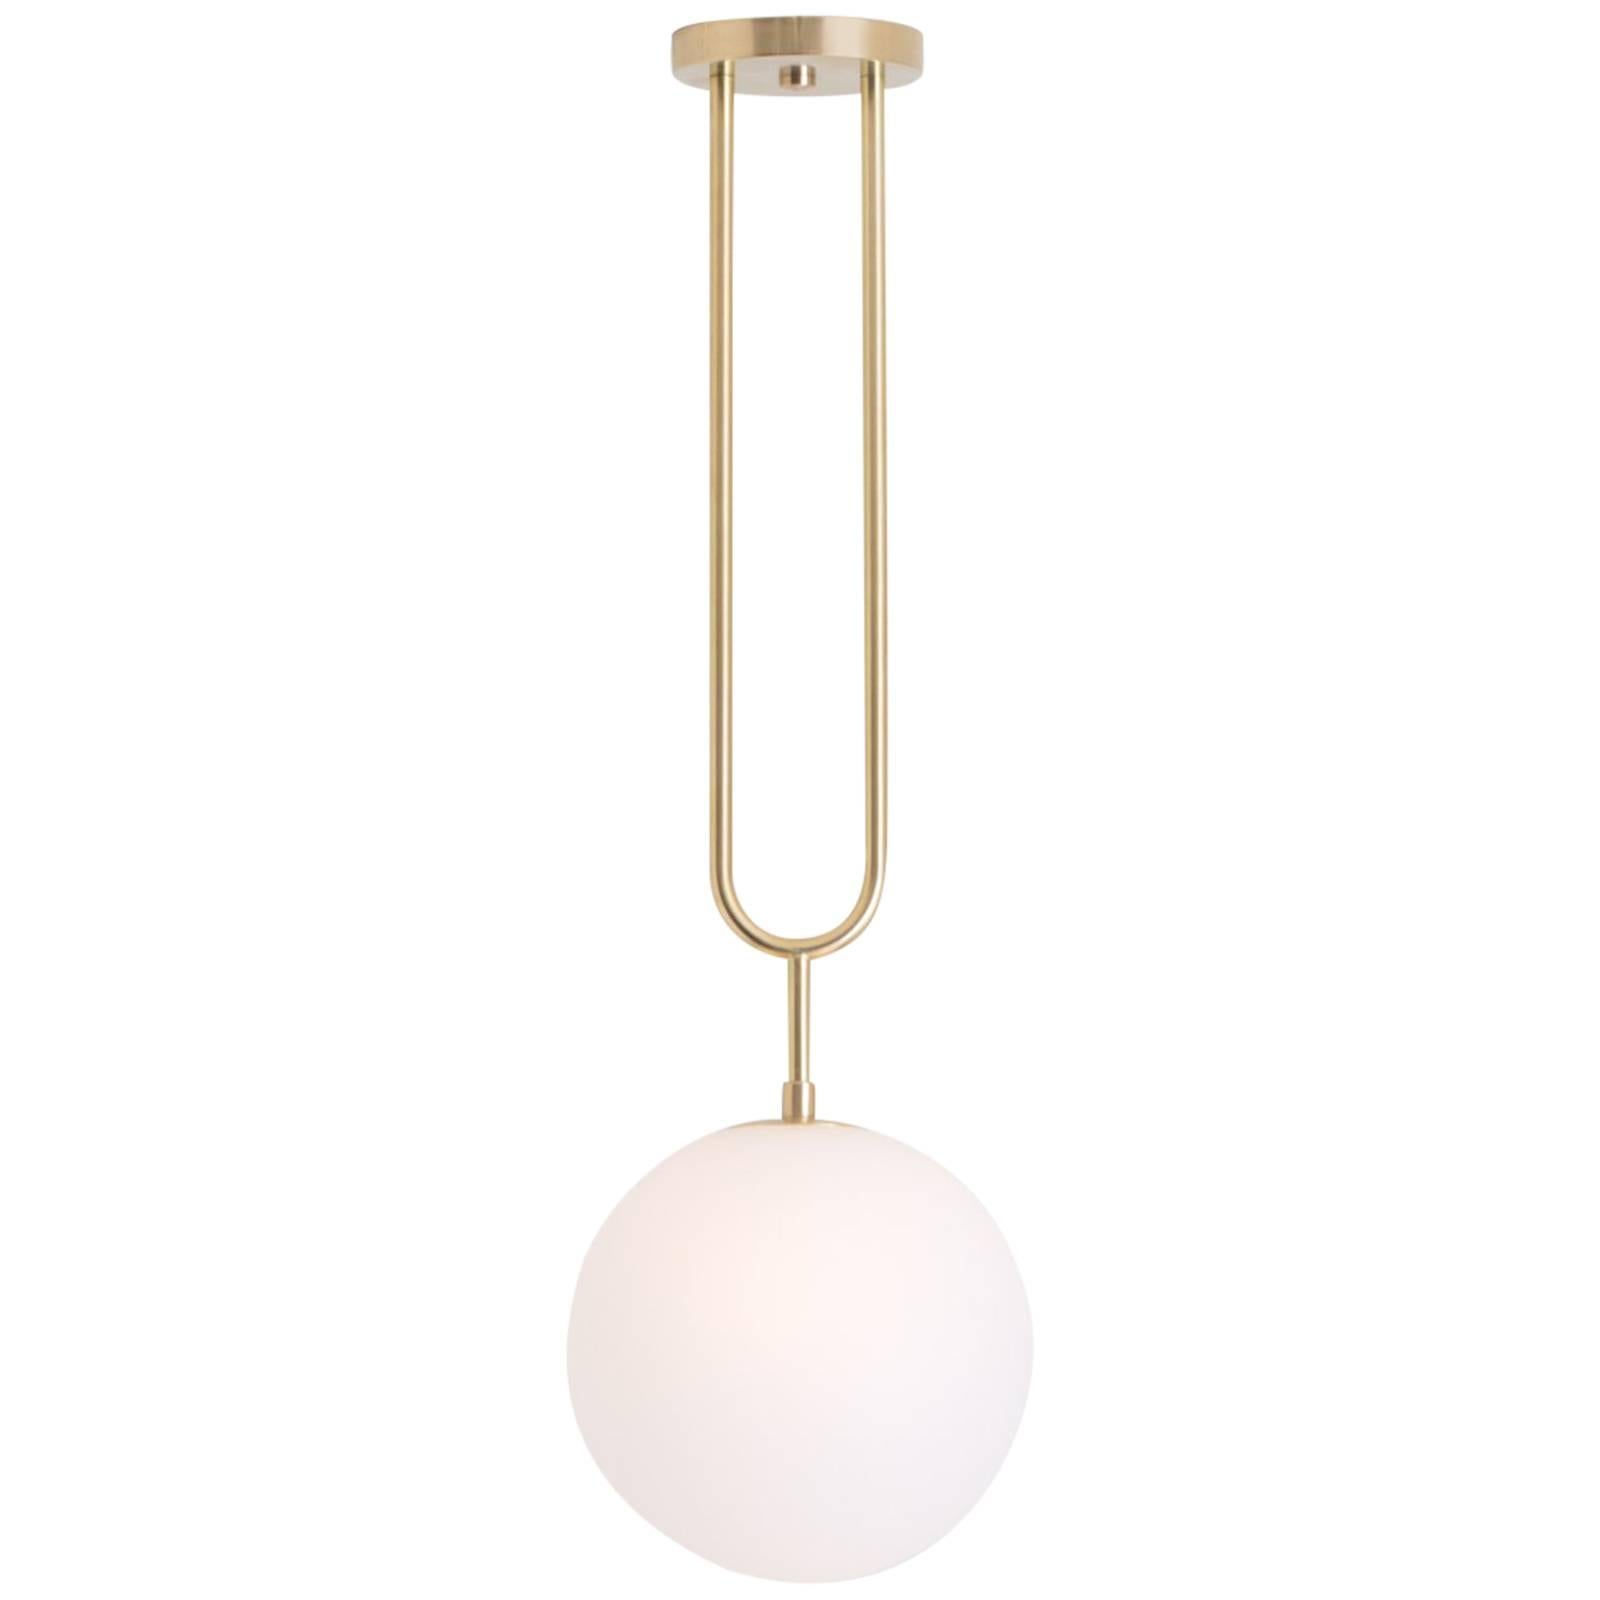 Drawing inspiration from a pearl pendant, the Koko line is elegant and modern, with its luminous blown glass and brass arch detail. A versatile light, Koko can be displayed as a single pendant or arranged in a grouping as a